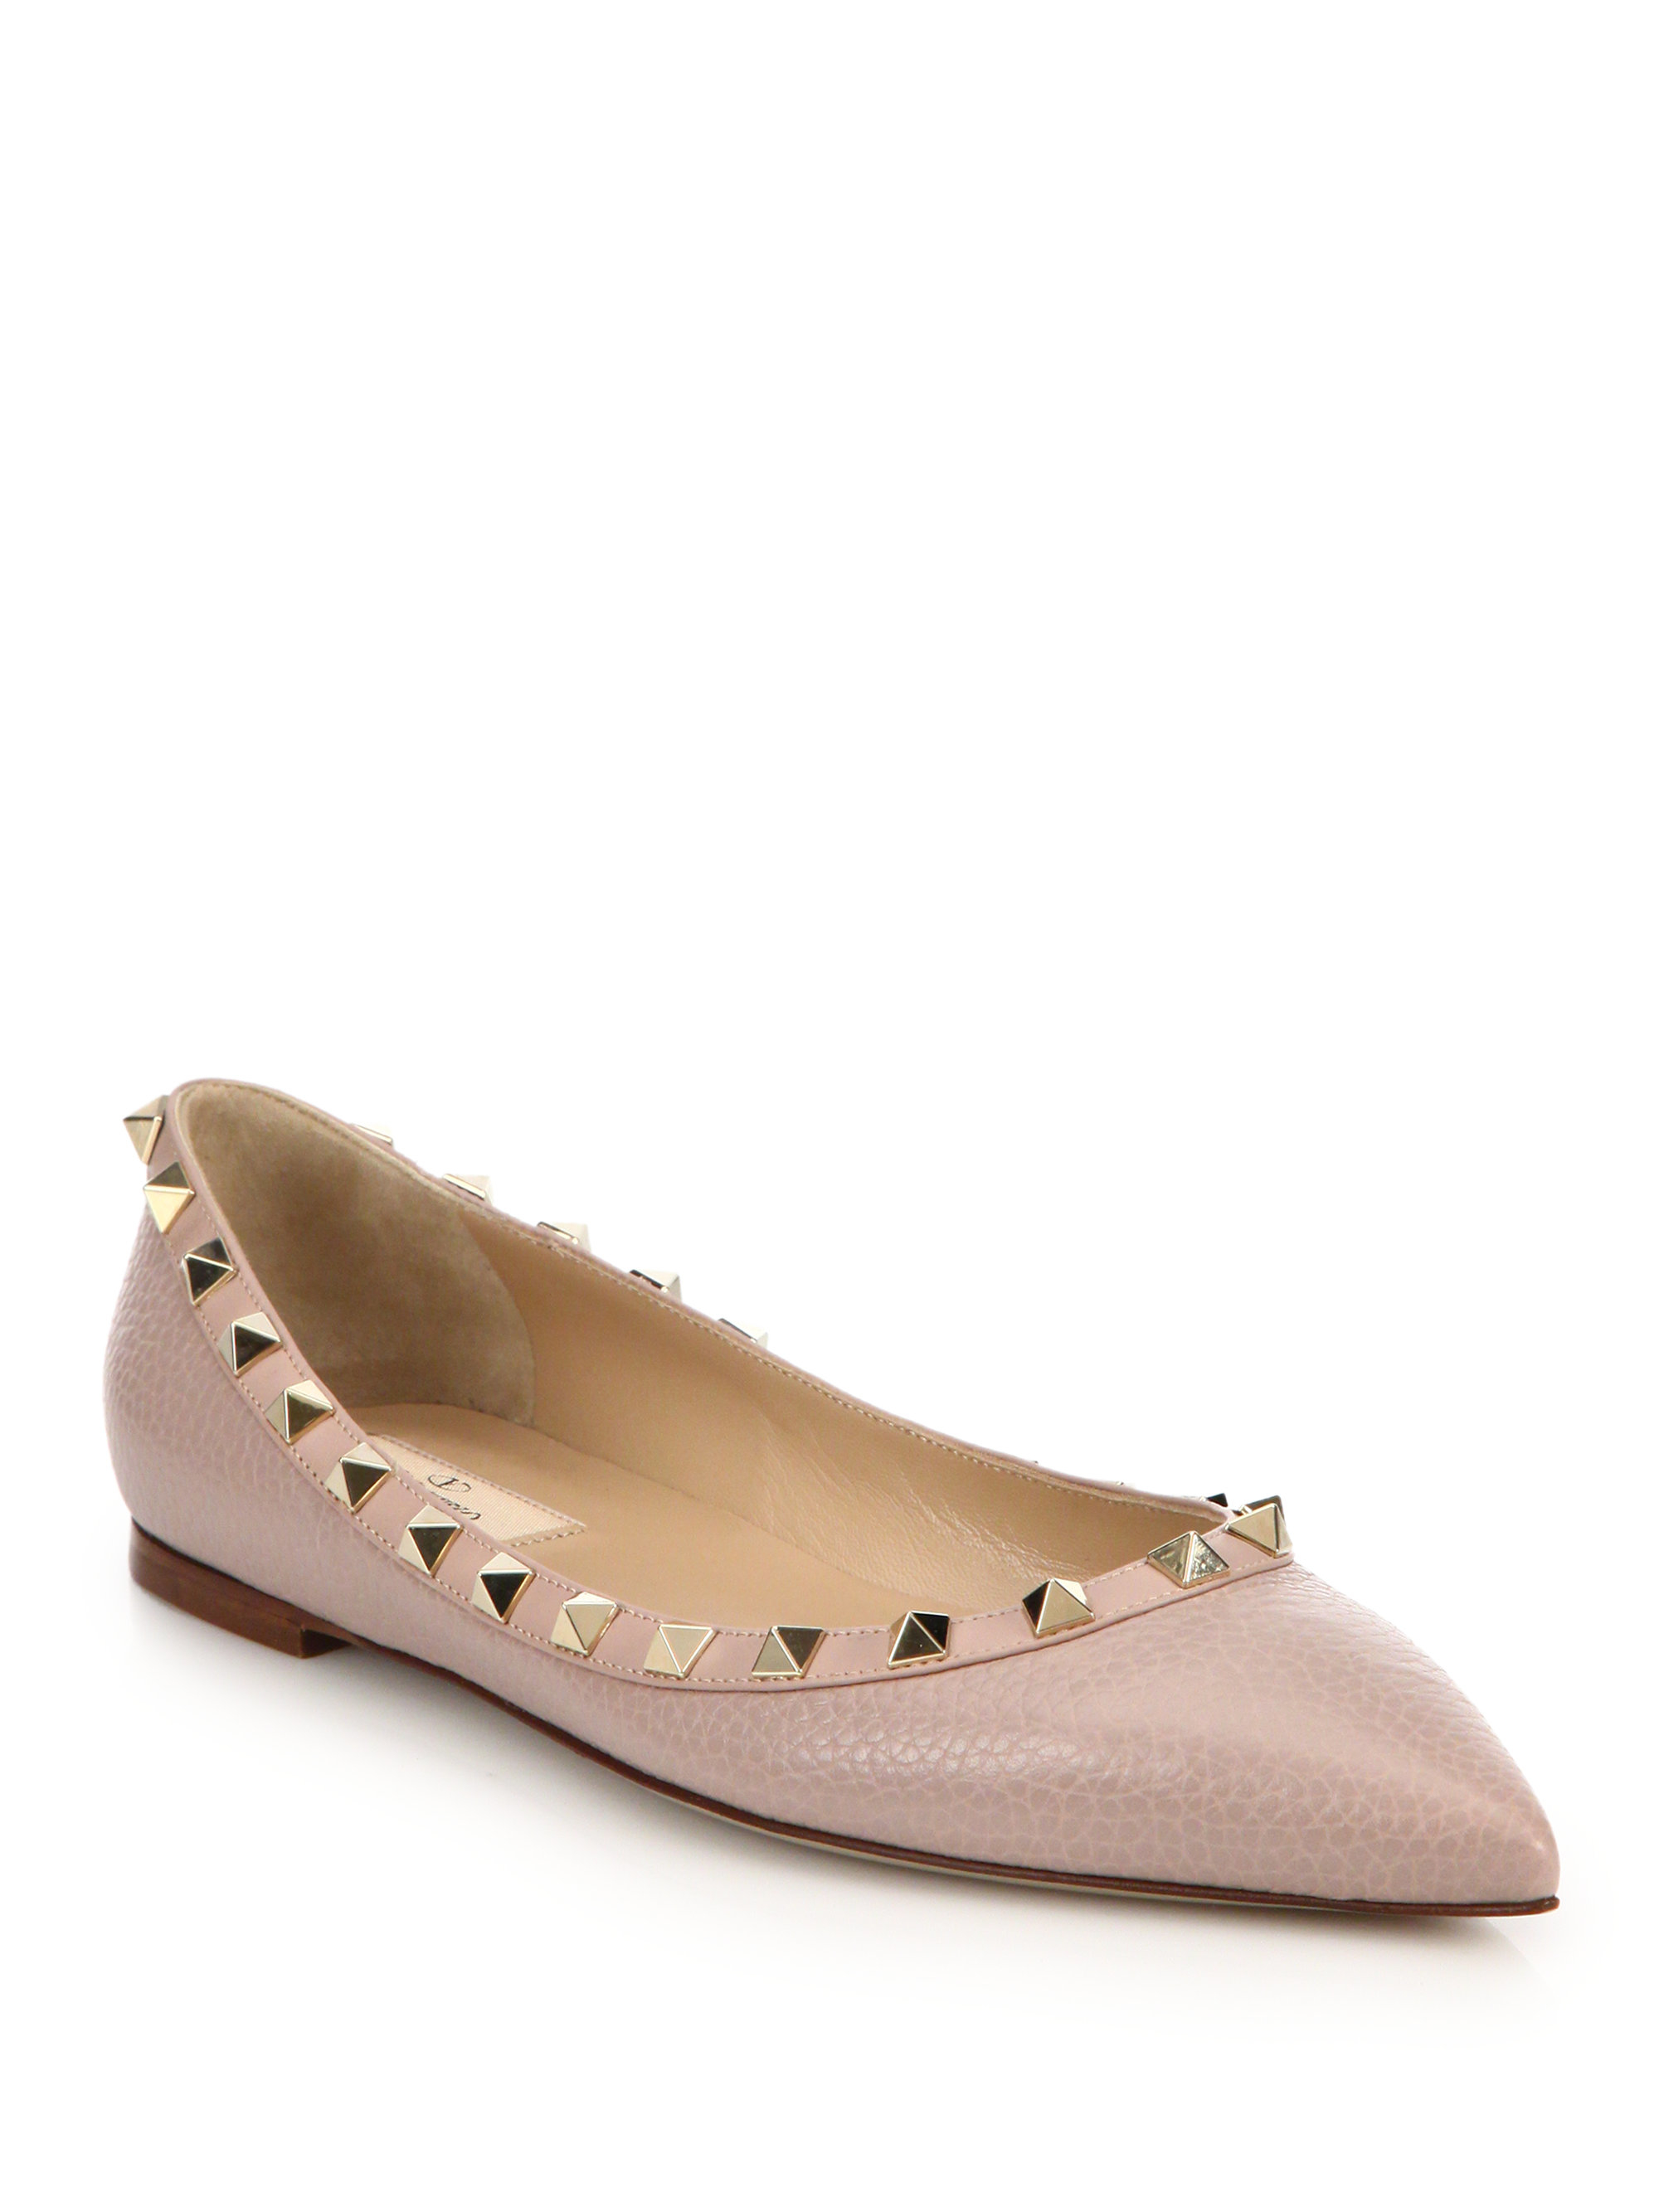 Valentino Rockstud Pebbled Leather Flats in Pink | Lyst